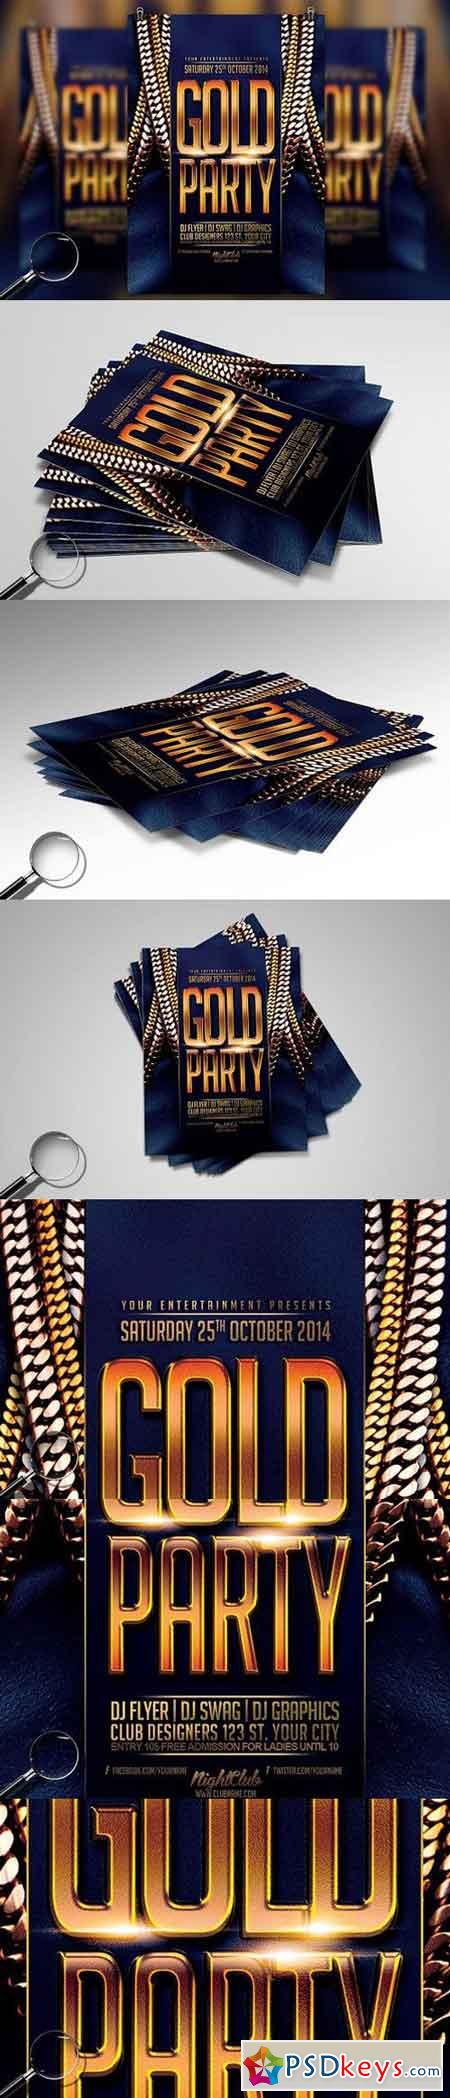 Gold Party Urban Flyer Template 1617976